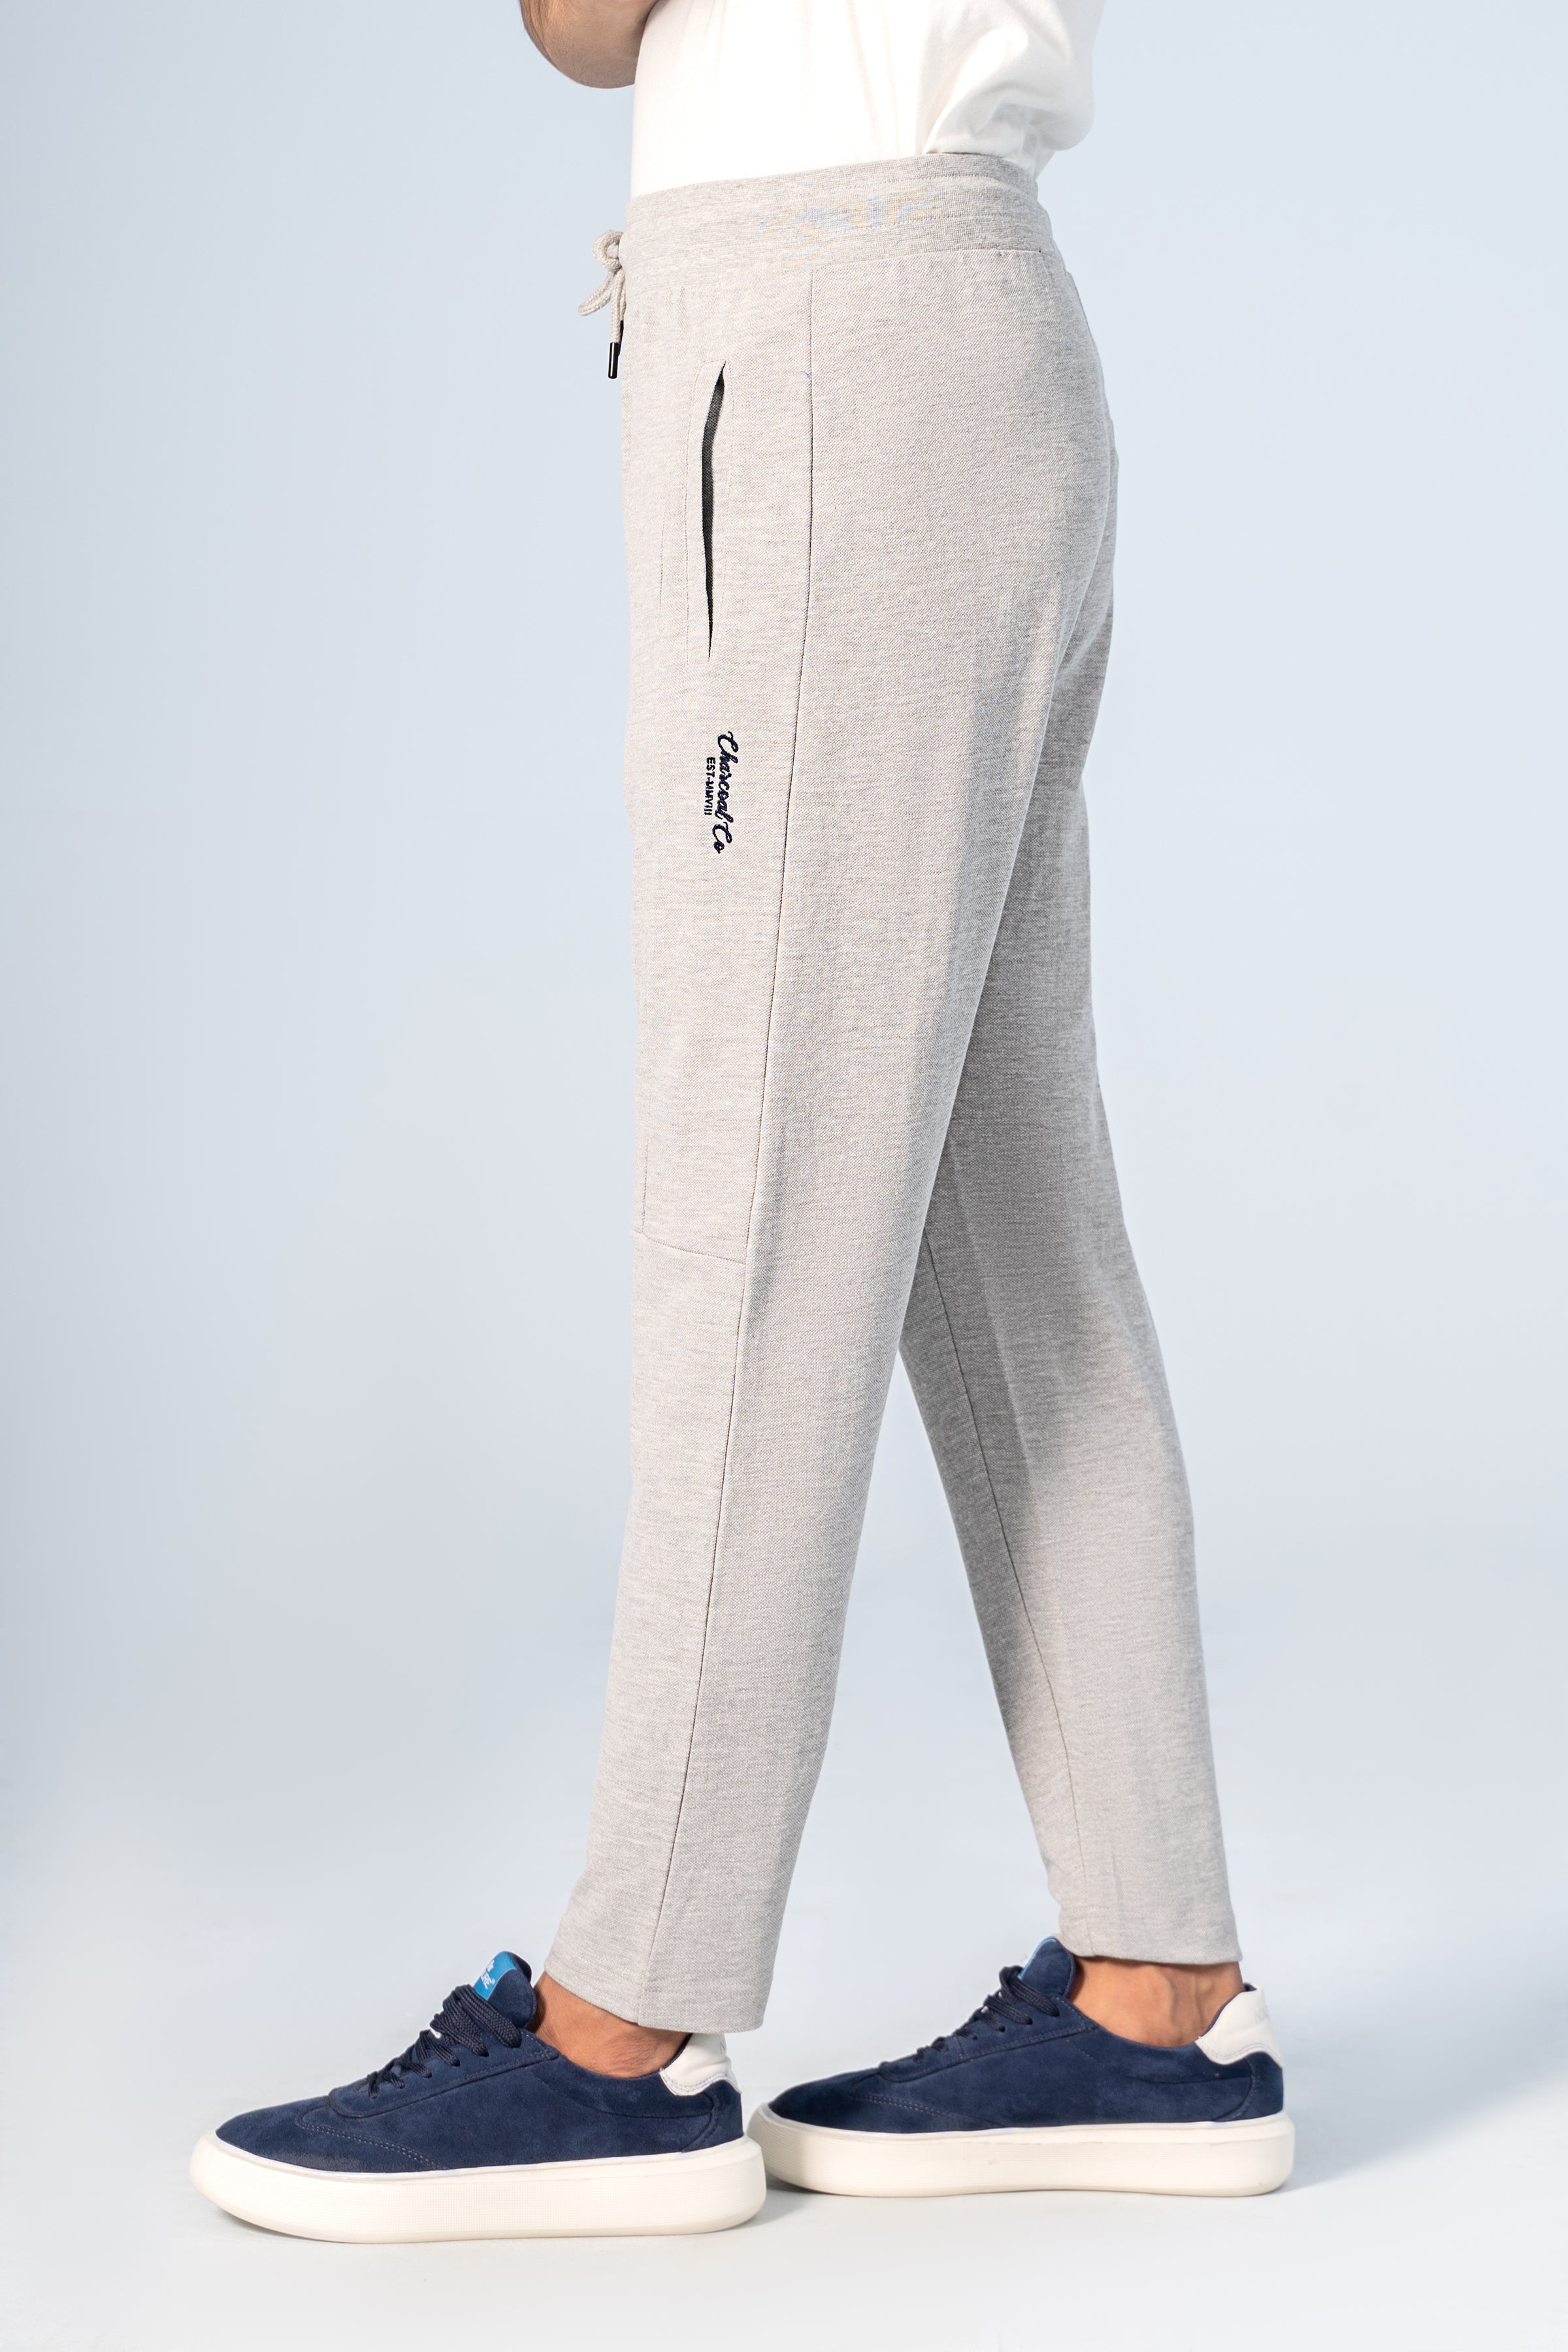 PIQUE JOGGER WAIST PANEL TROUSER GREY - Charcoal Clothing